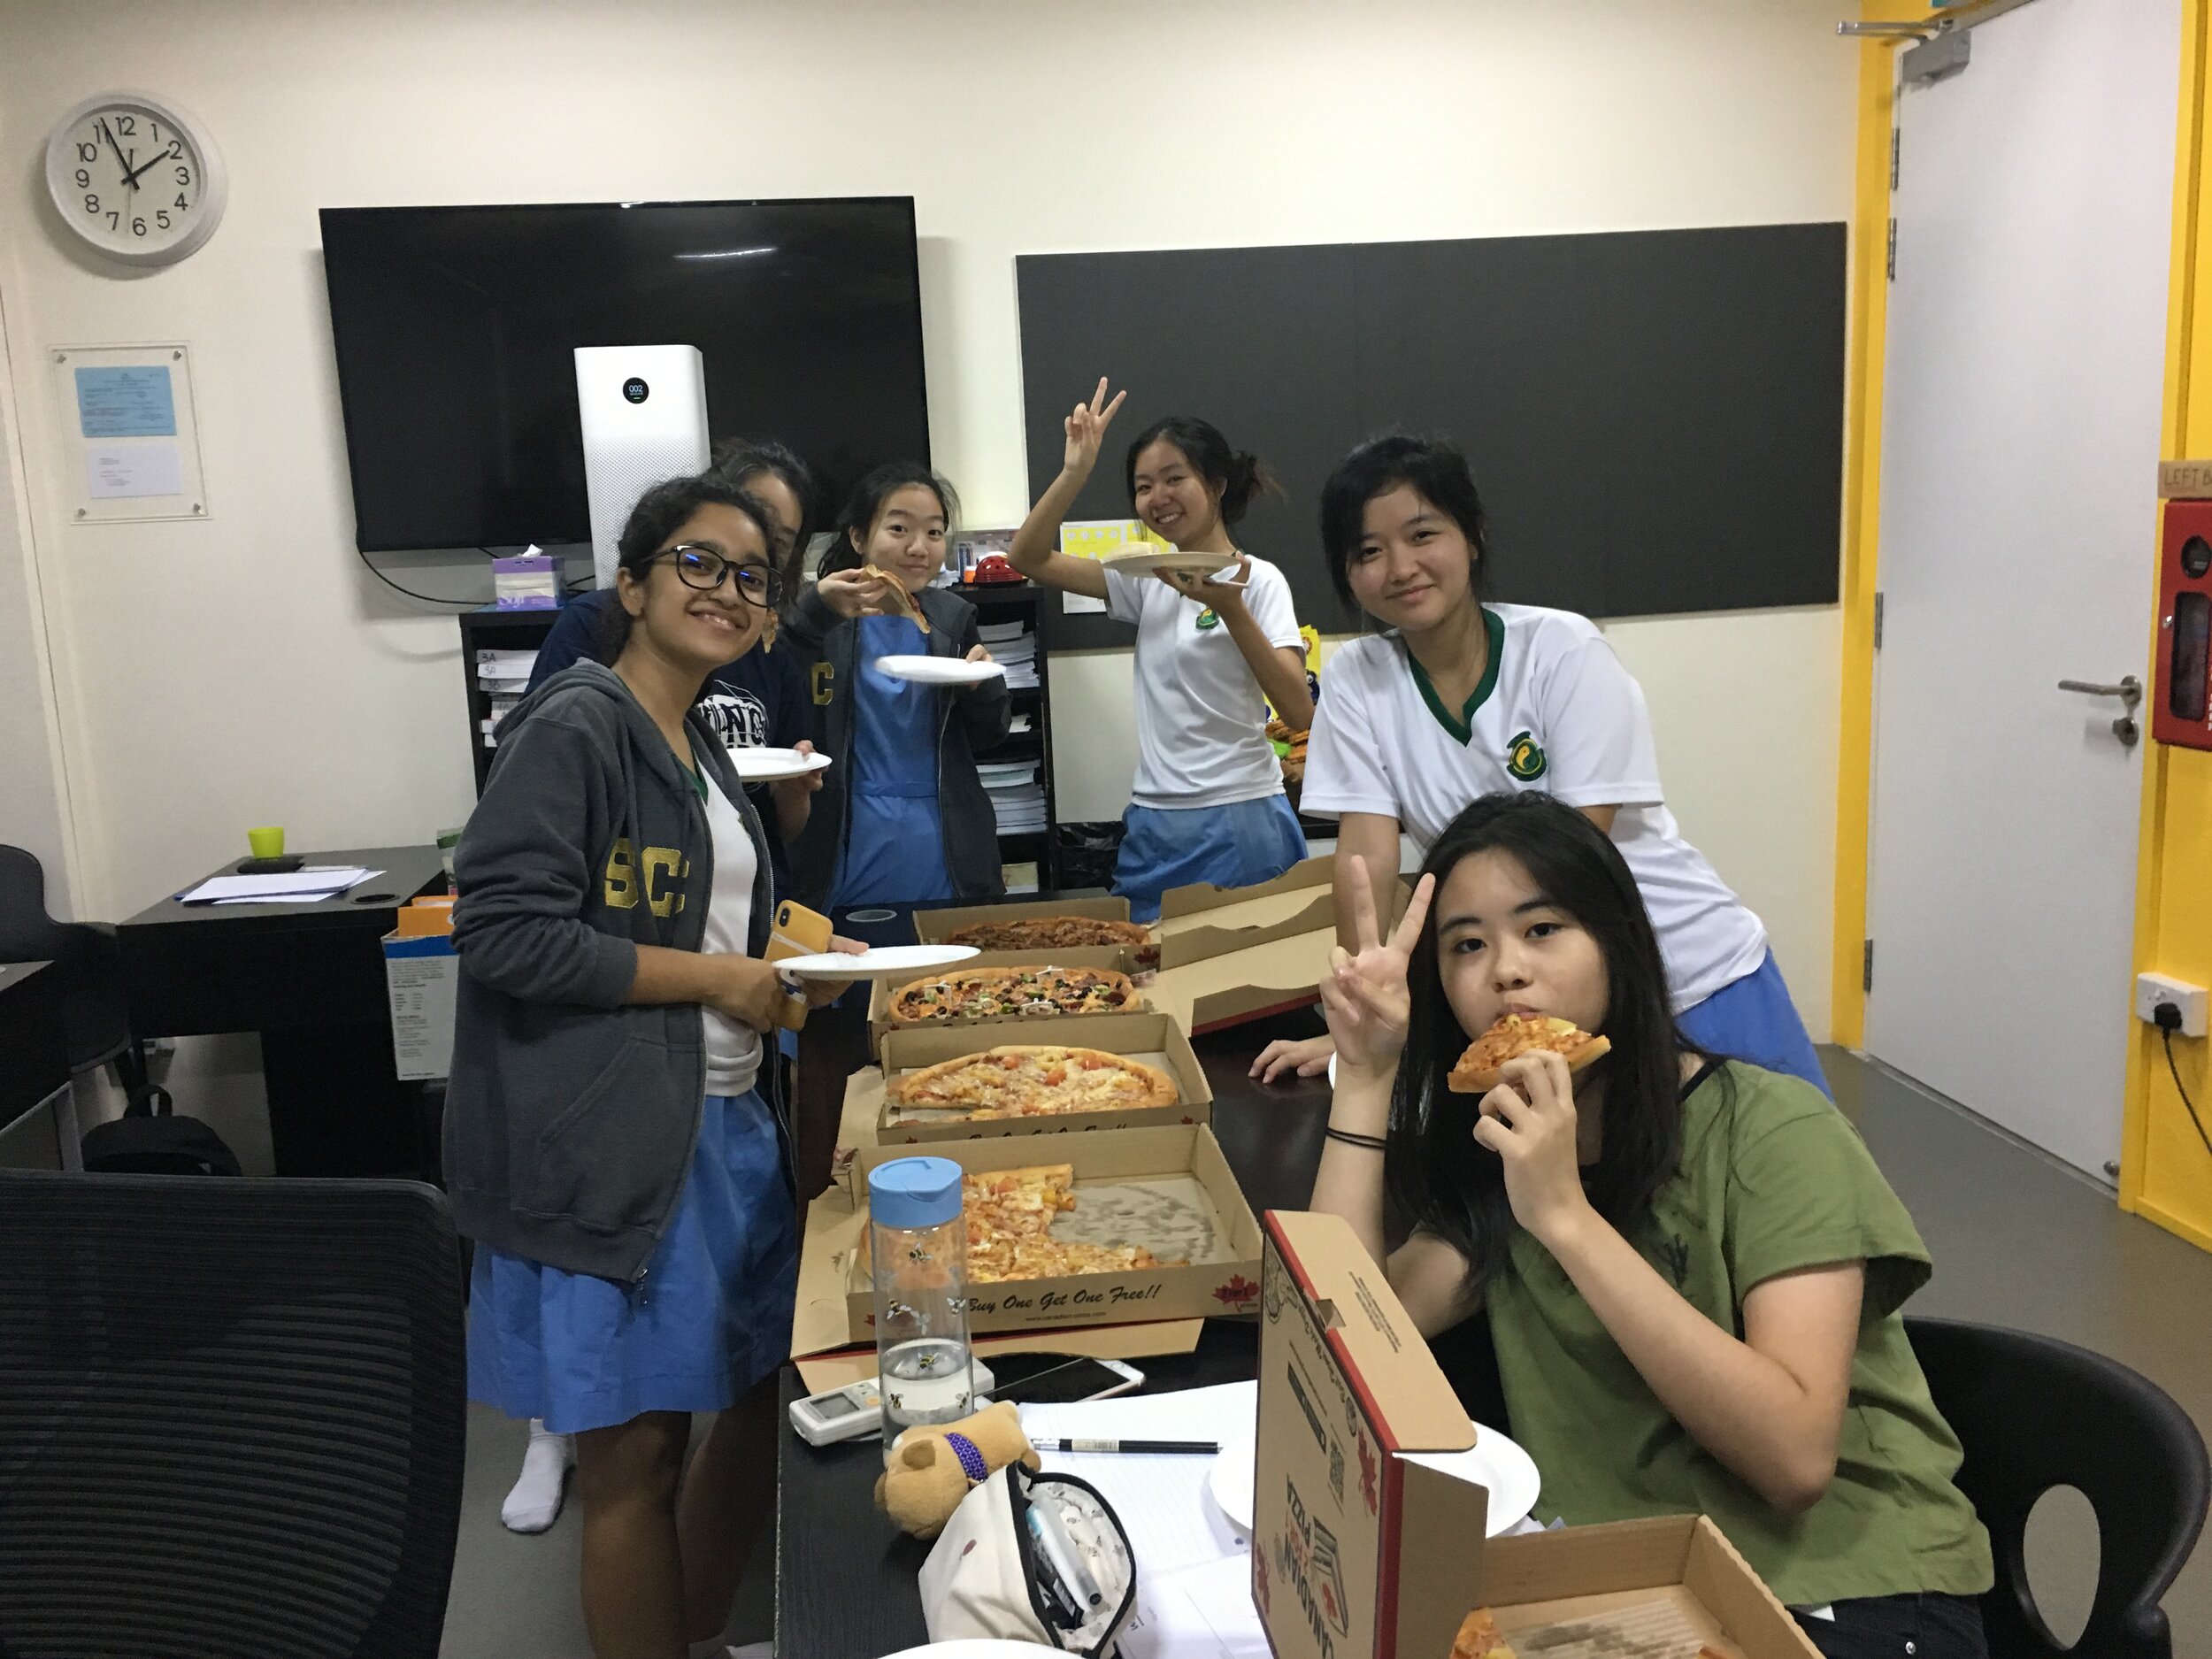 Math goes well with pizzas! These lively SCGS girls always brighten the day!